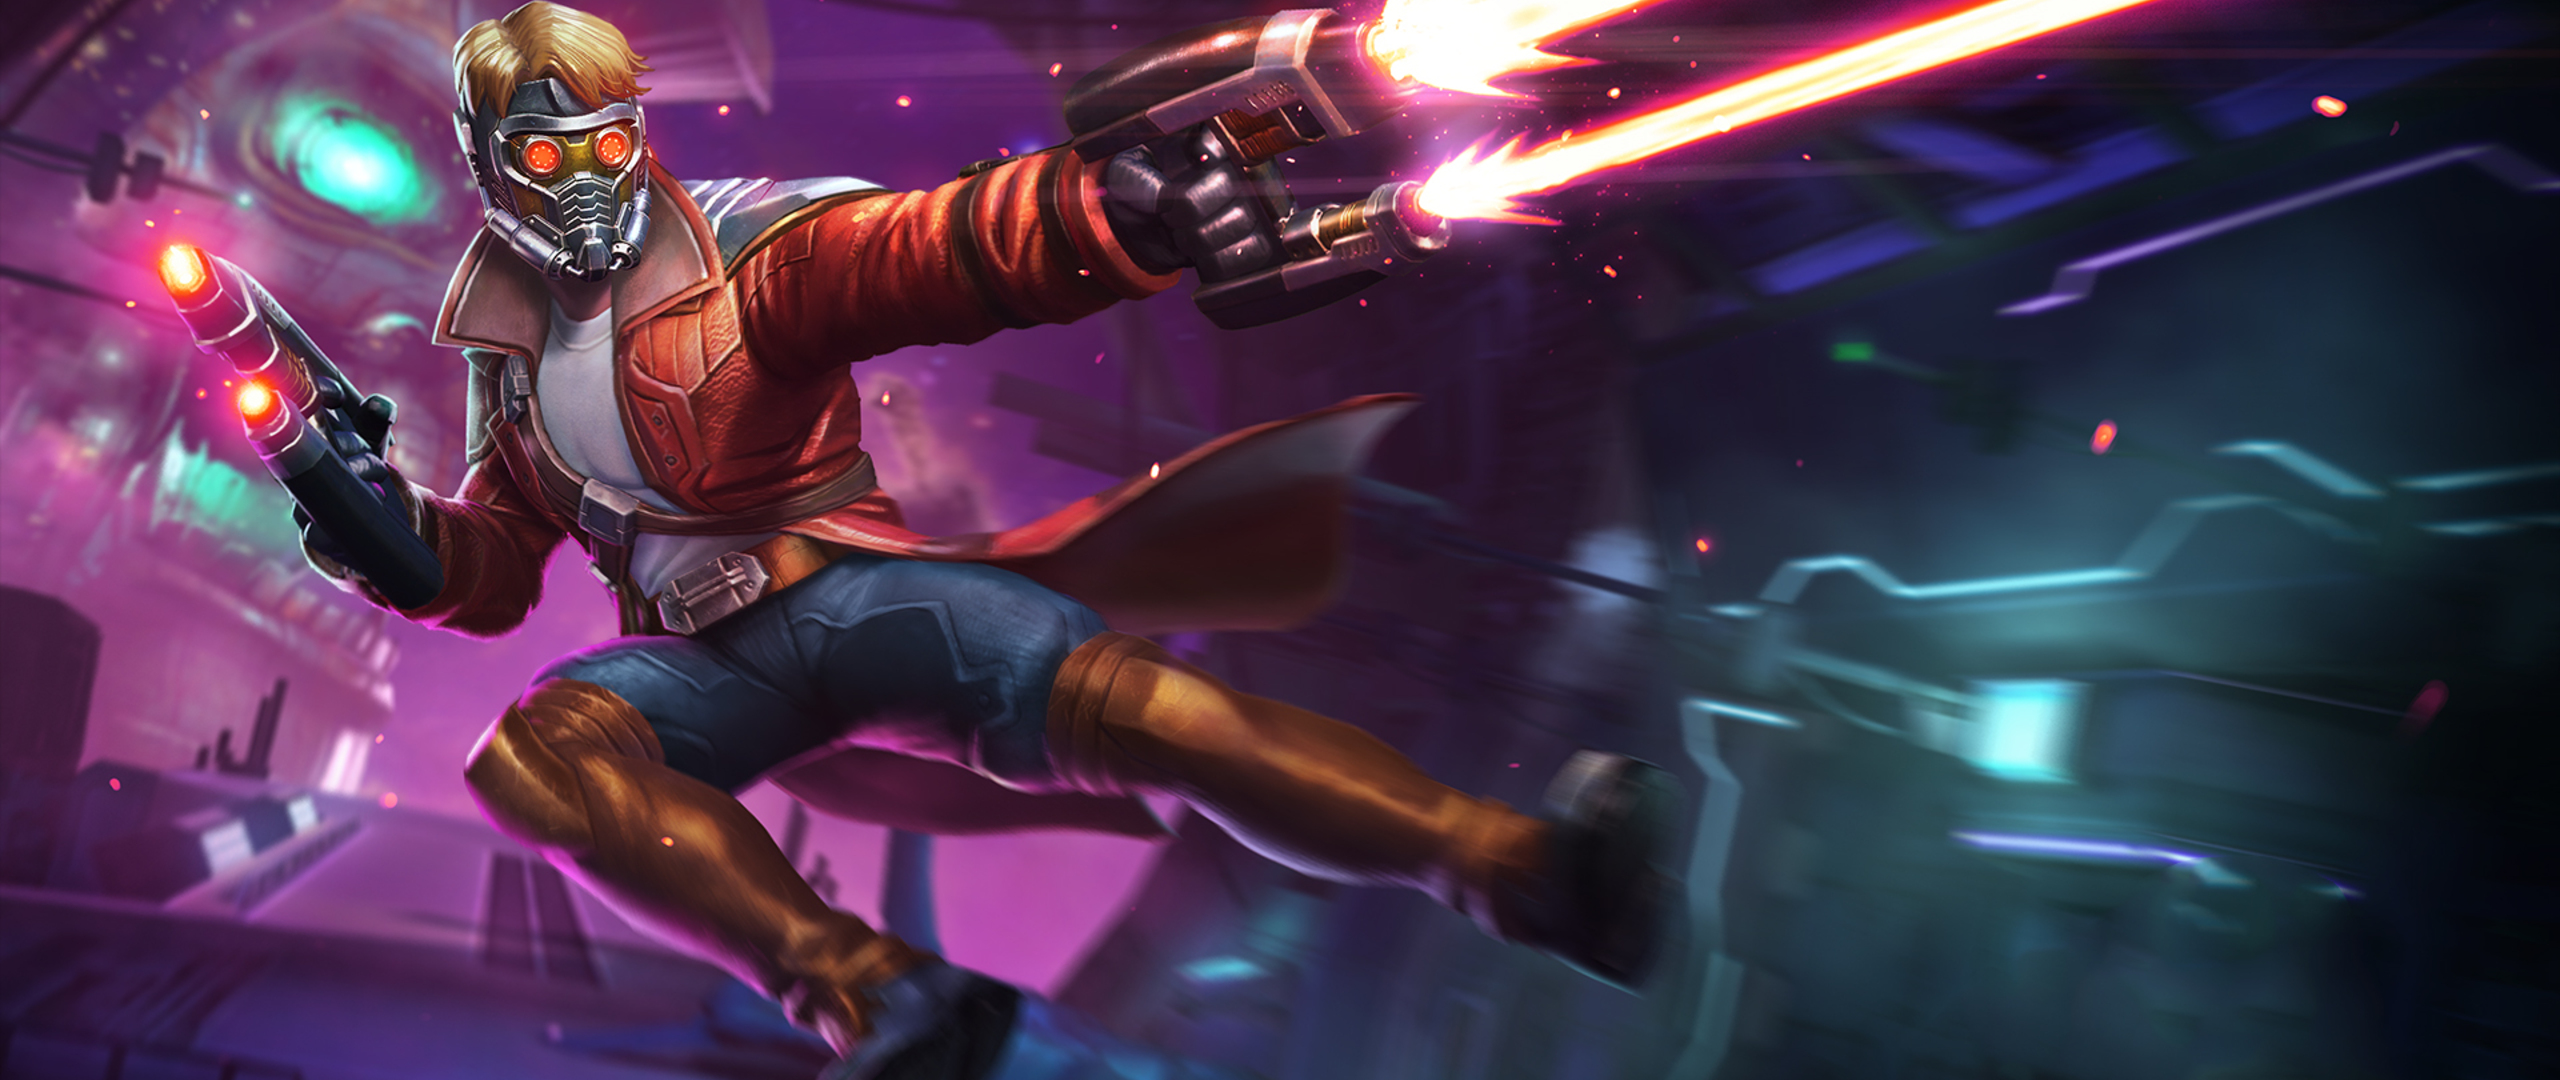 peter-quill-star-lord-marvel-contest-of-champions-lg-2560x1080.jpg